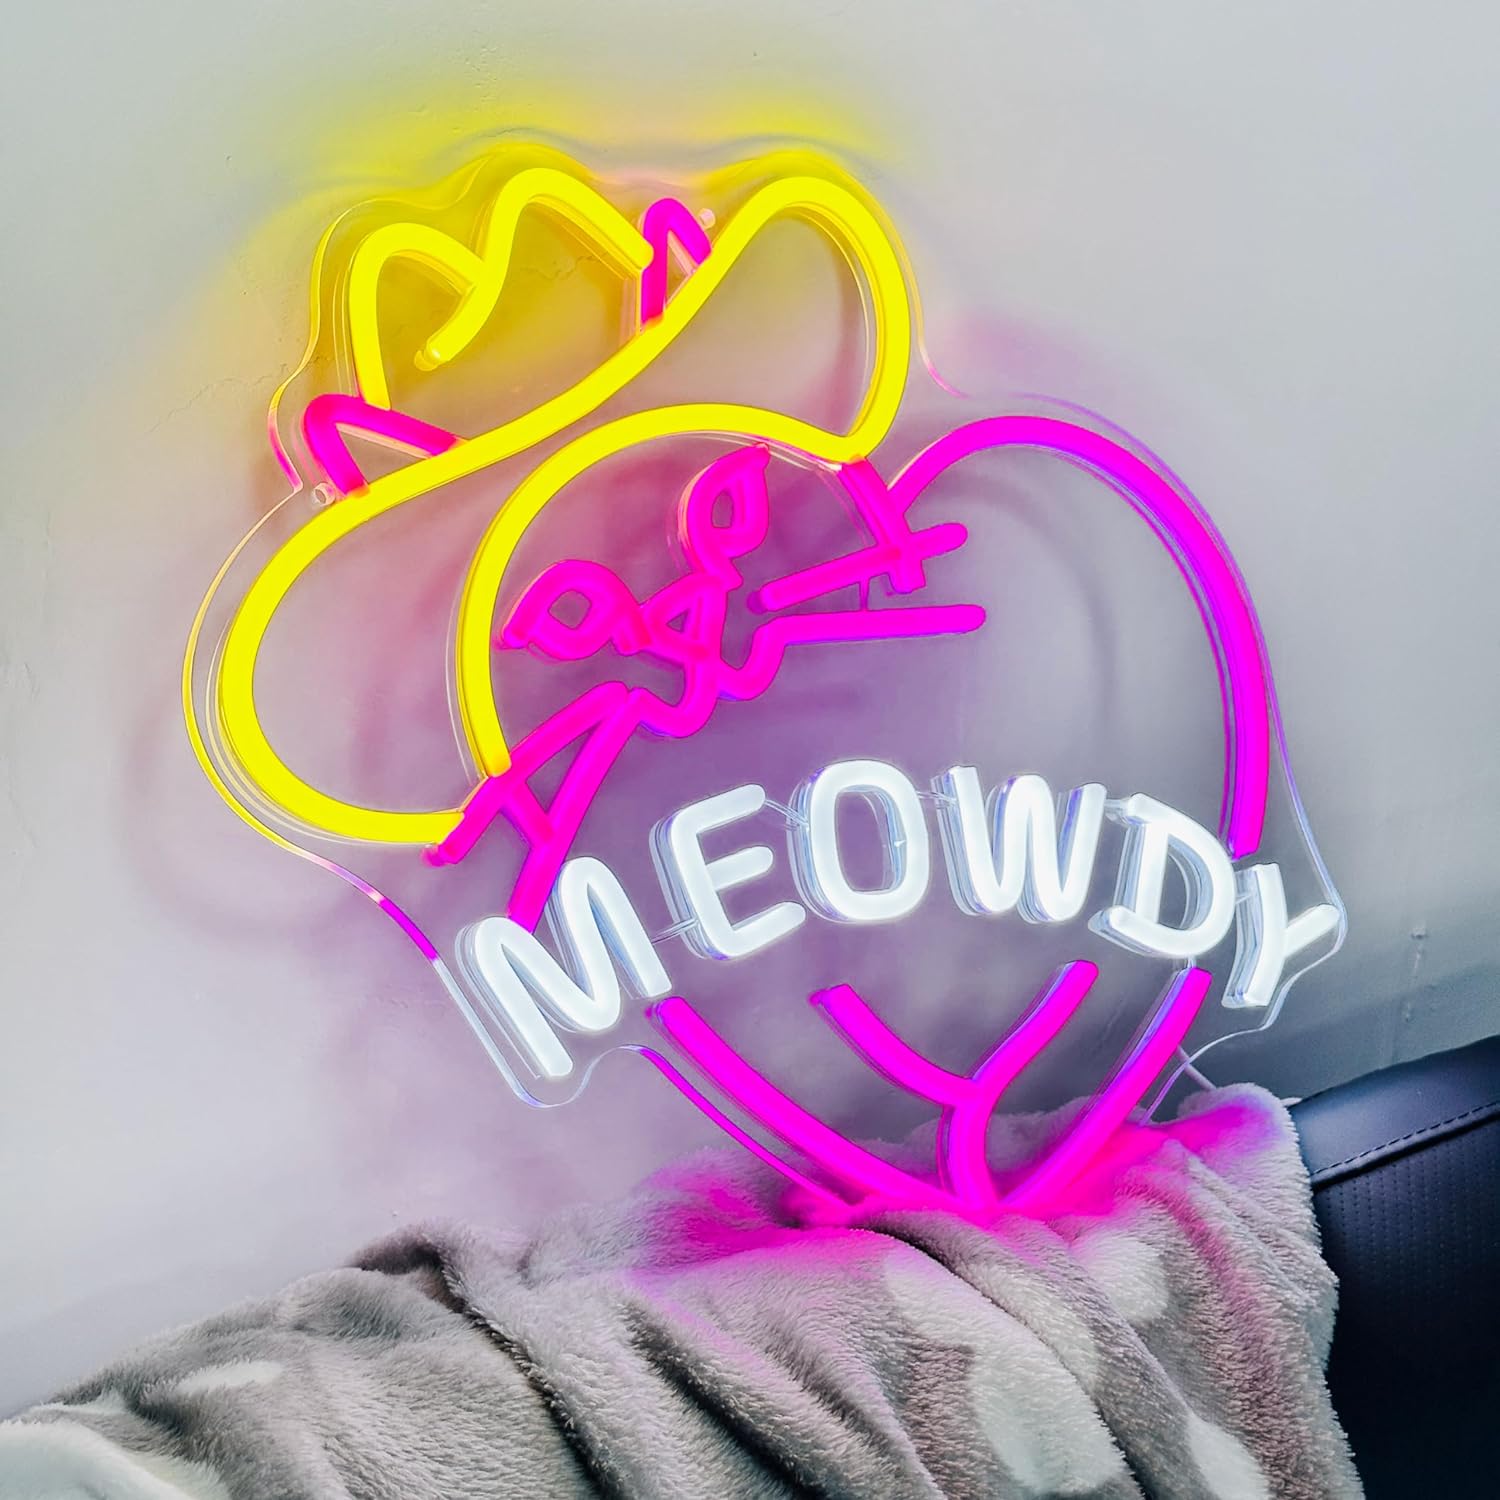 NEONIP-100% Handmade Cowgirl Cat in Heart Shape Meowdy Neon Sign For Home Decor